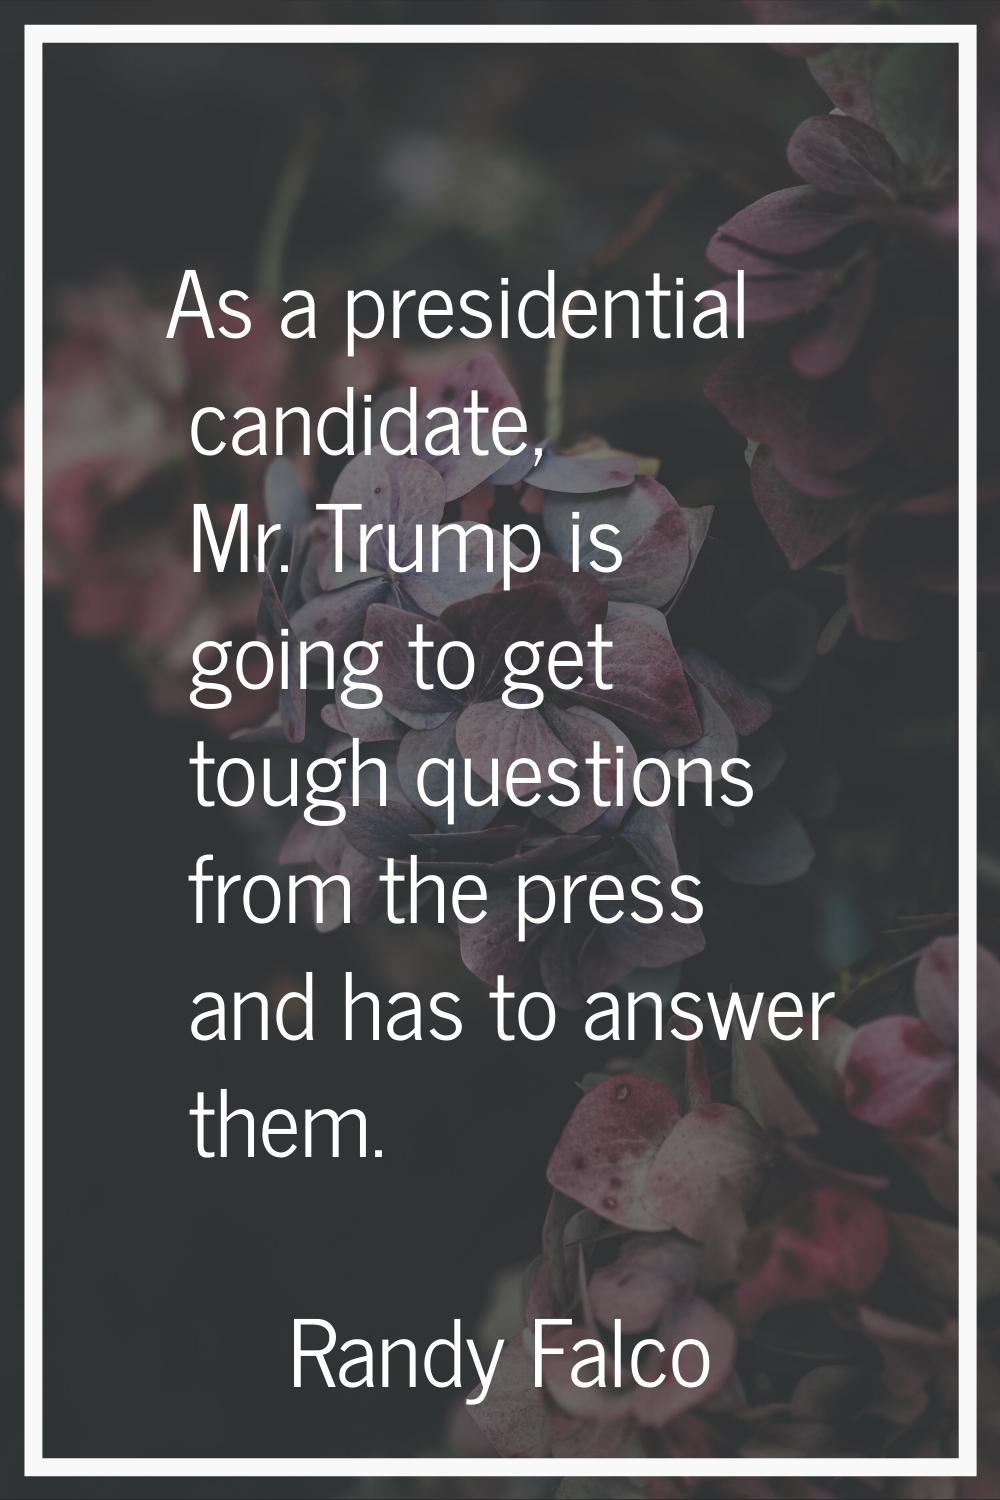 As a presidential candidate, Mr. Trump is going to get tough questions from the press and has to an